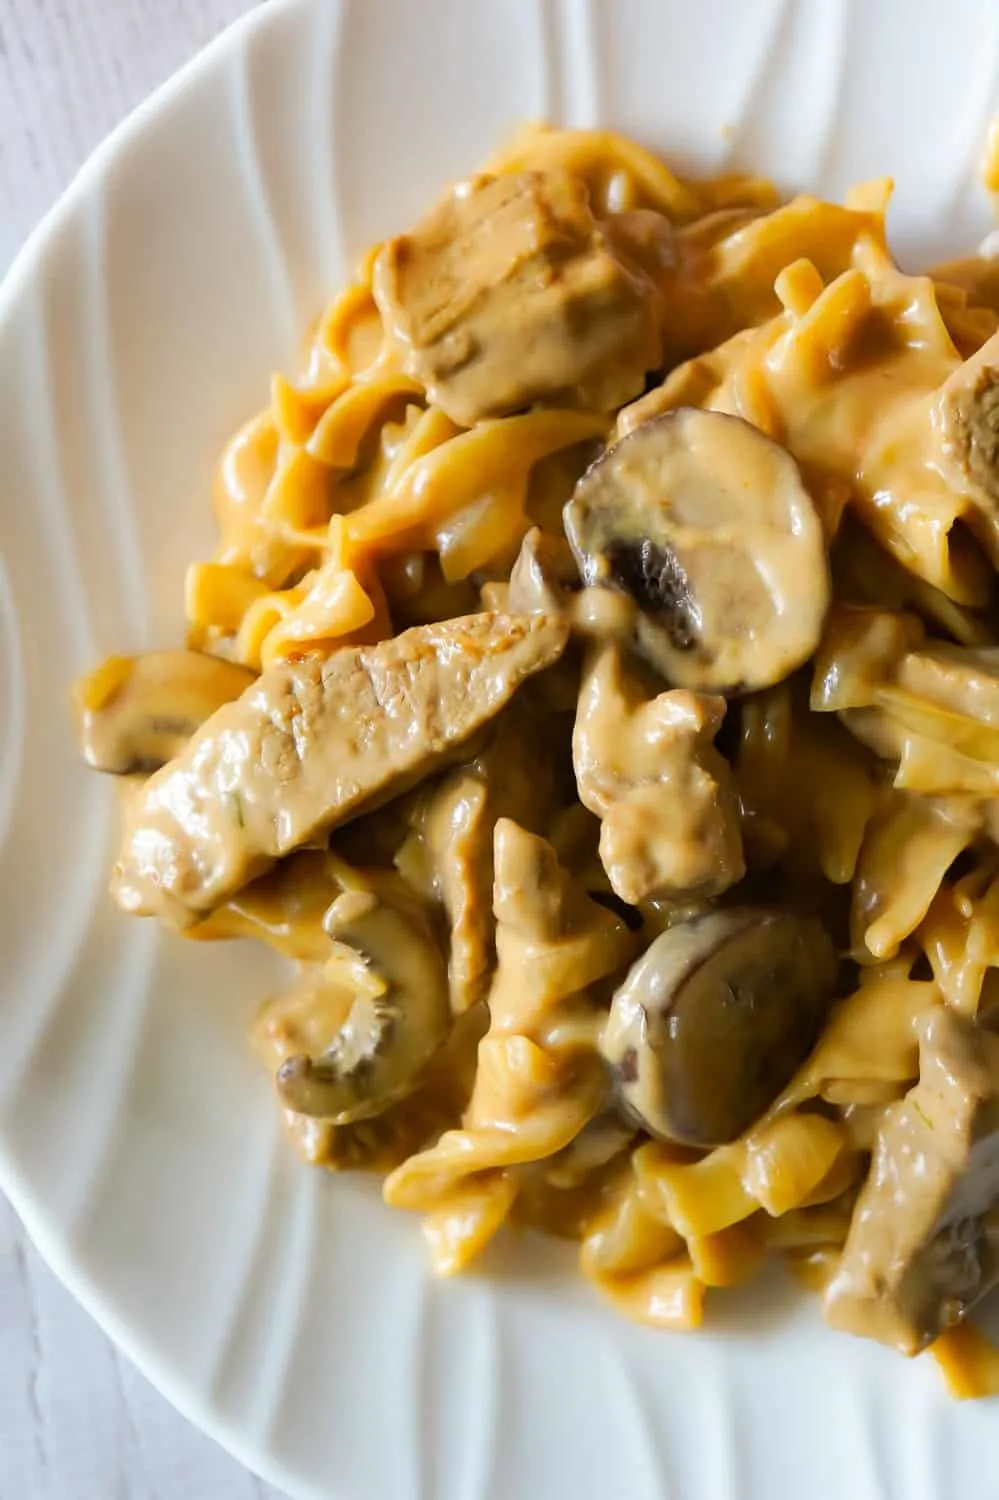 Easy Beef Stroganoff is a delicious one pot dinner recipe loaded with steak strips, onions, mushrooms and egg noodles in a sour cream and beef gravy sauce.